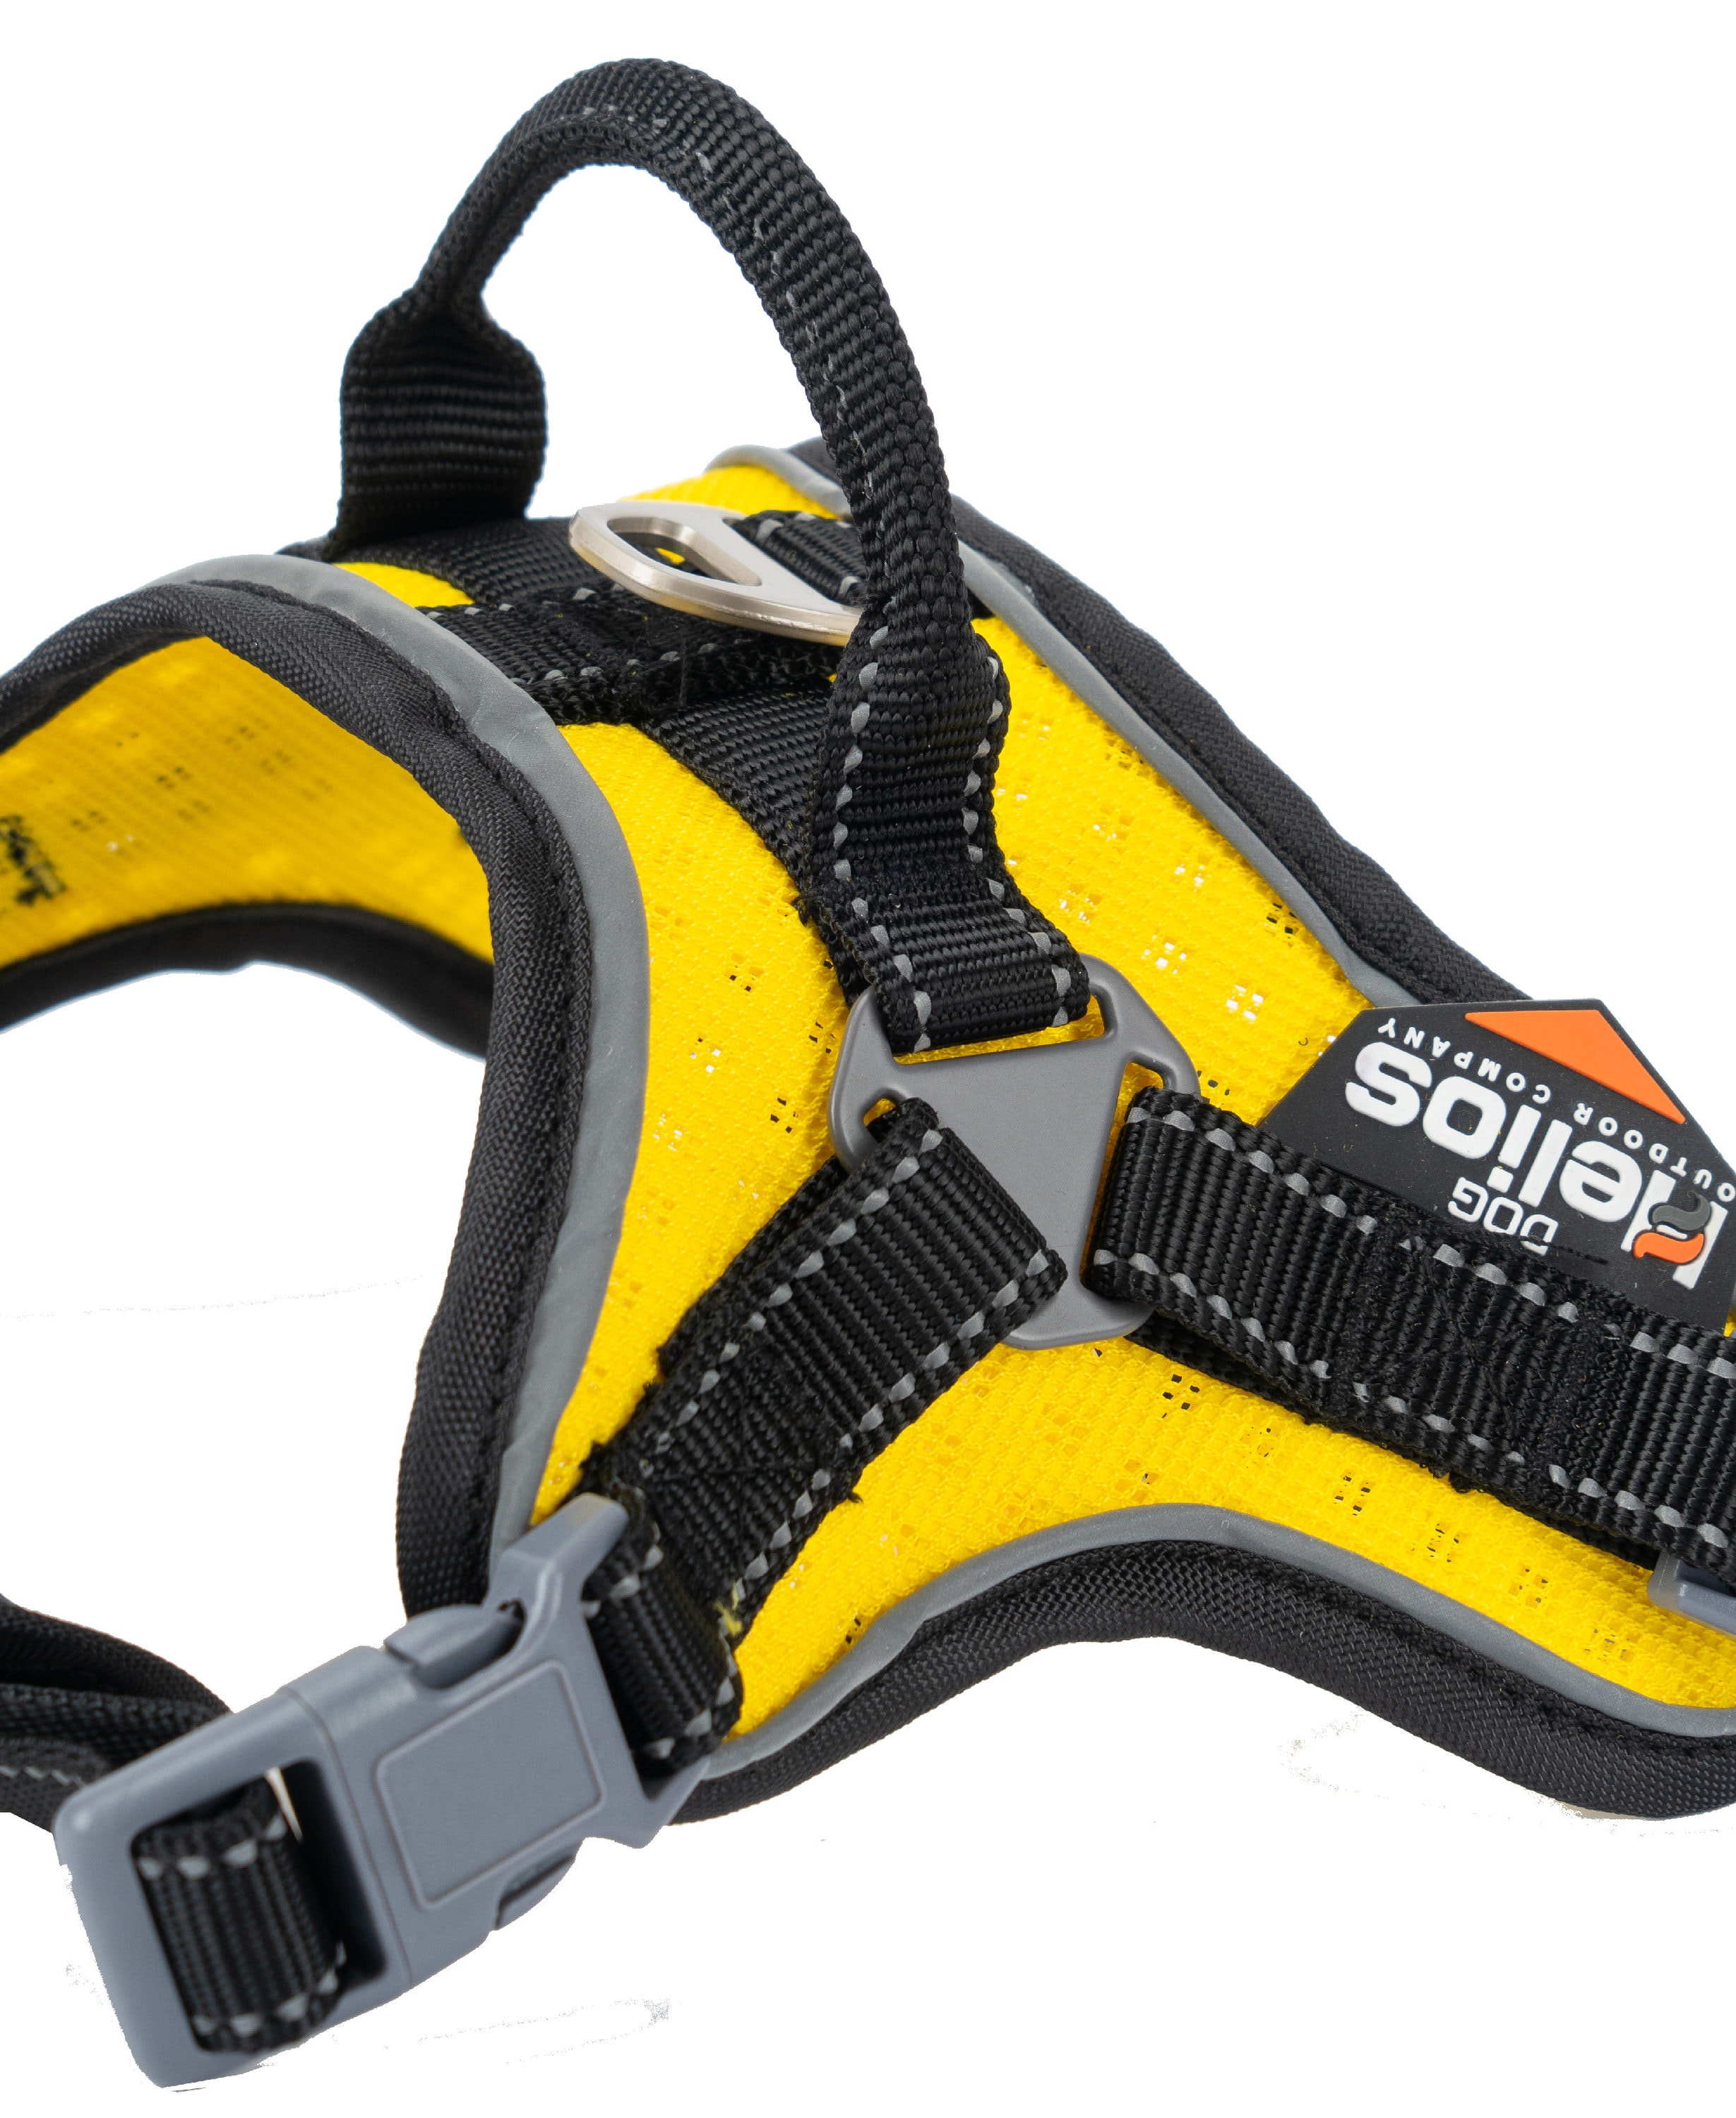 YOULY Yellow/Blue Reflective Dog Harness, Small